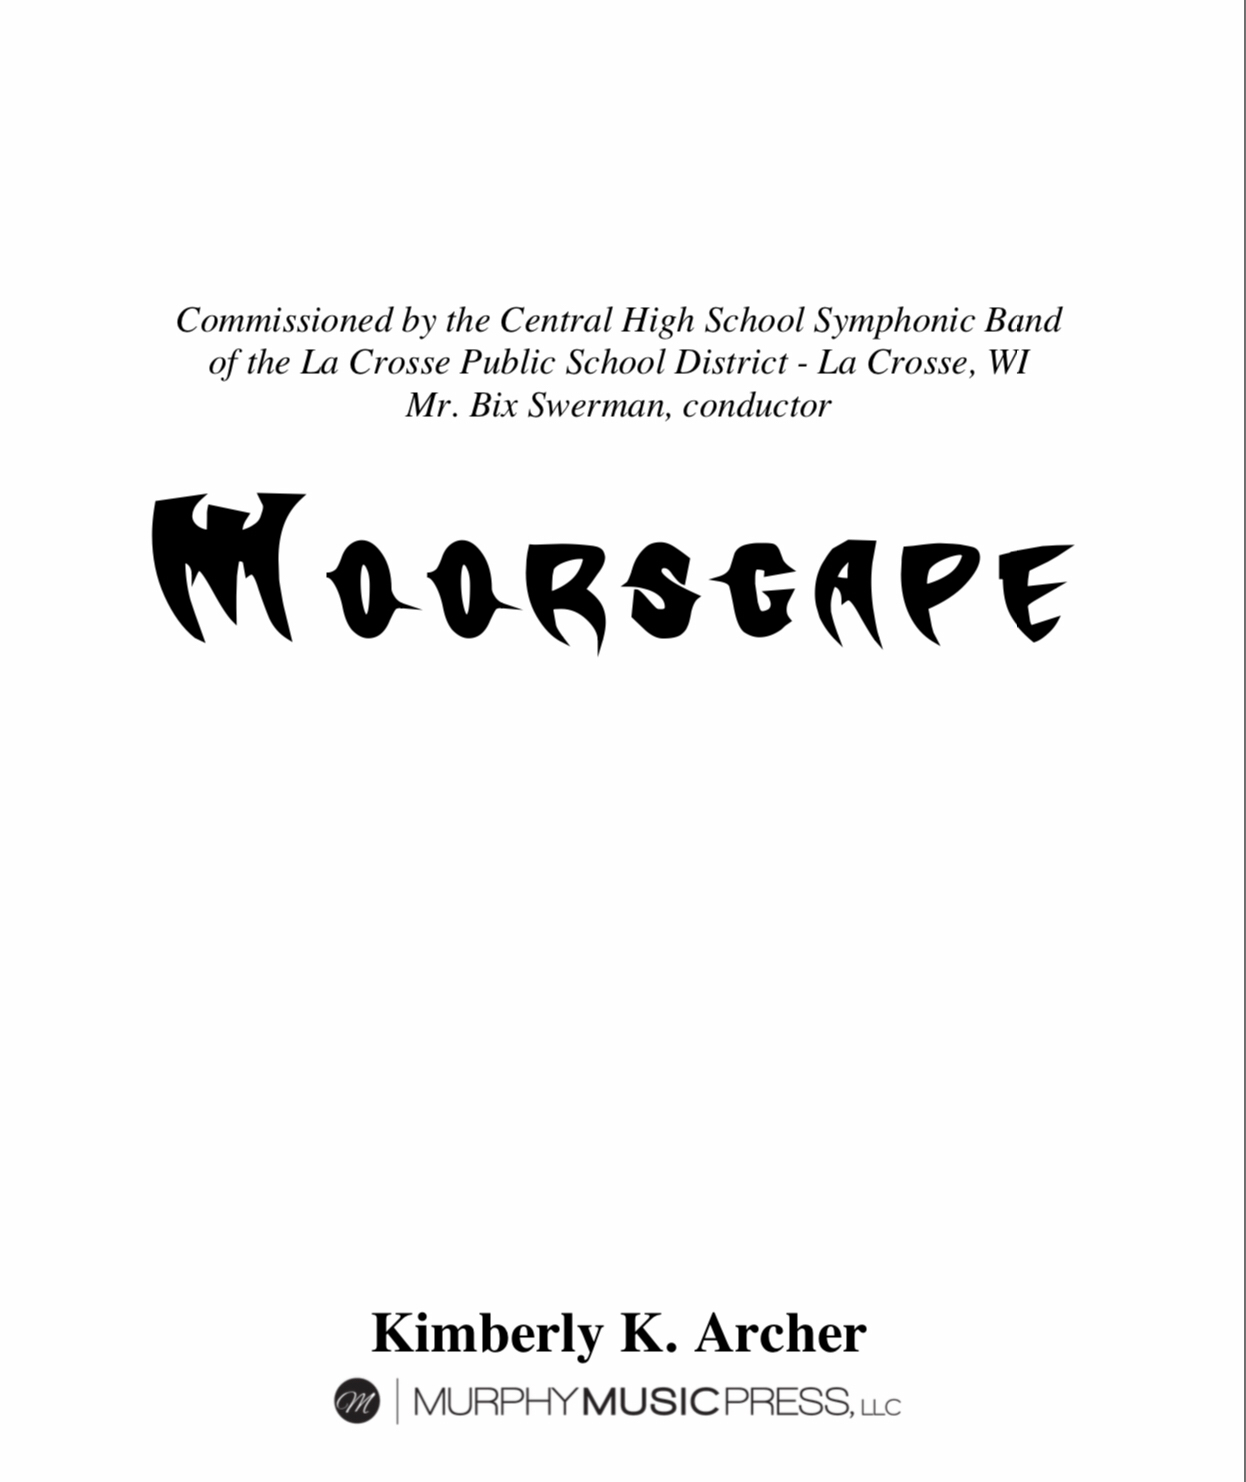 Moorscape by Kimberly Archer